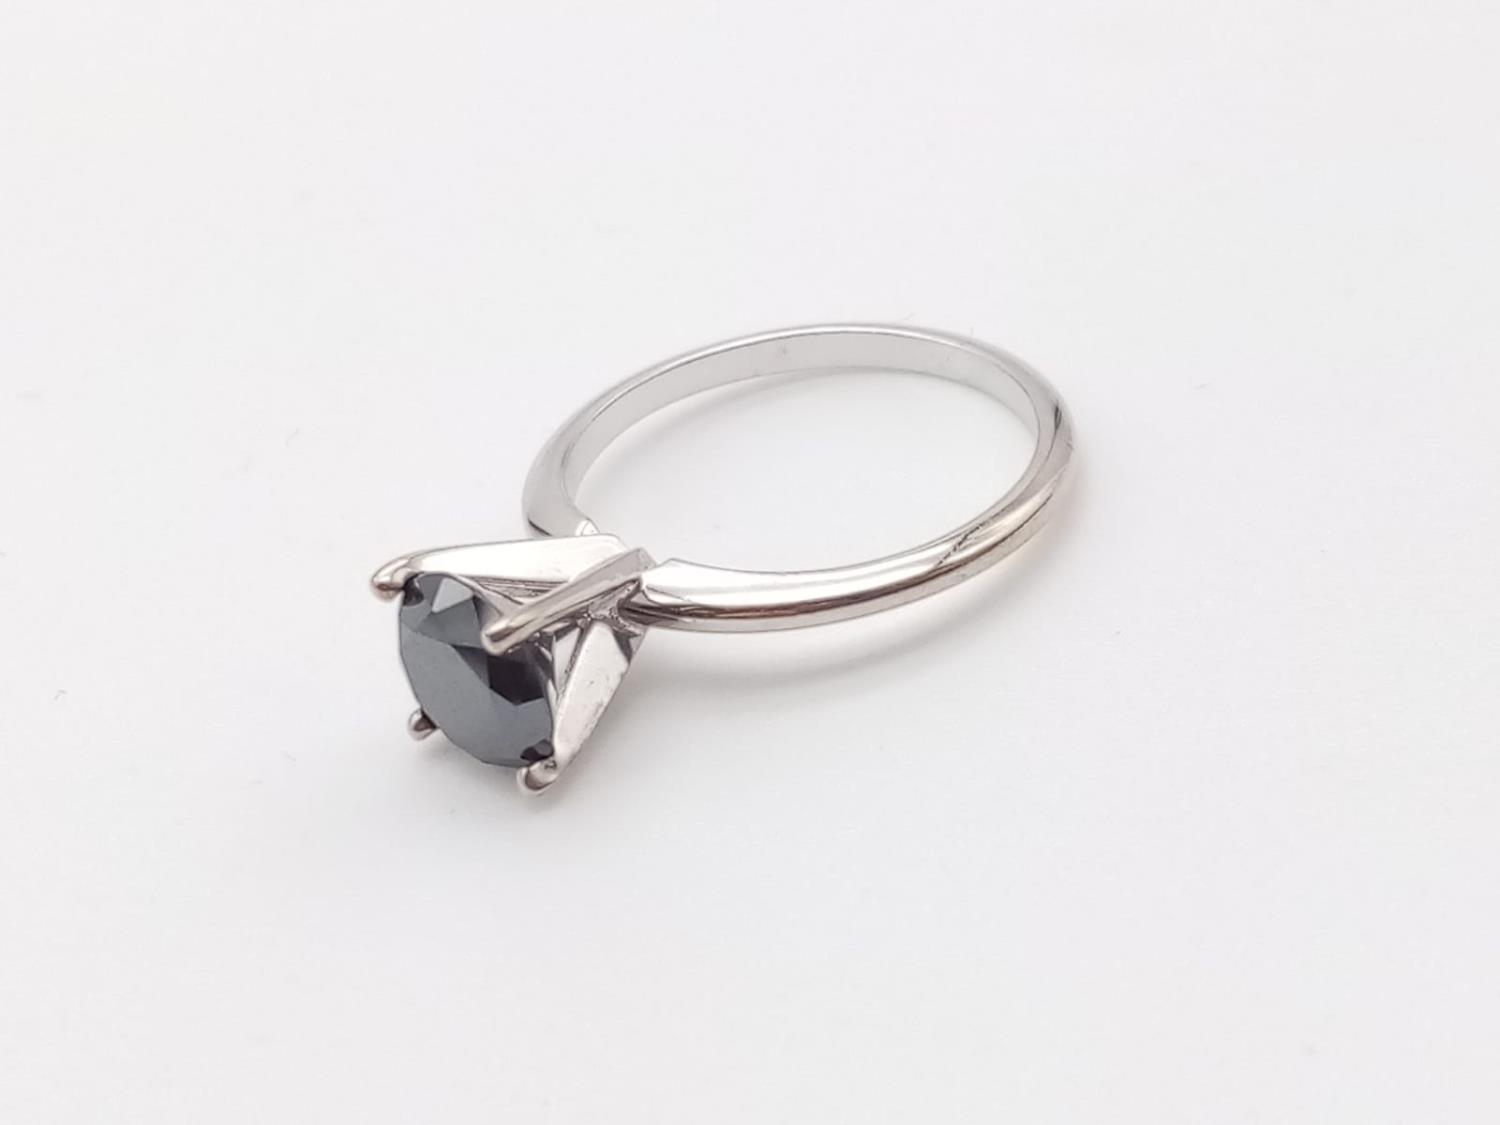 Black diamond solitaire ring set in 14k white gold, weight 2.5g and size K1/2 - Image 2 of 6